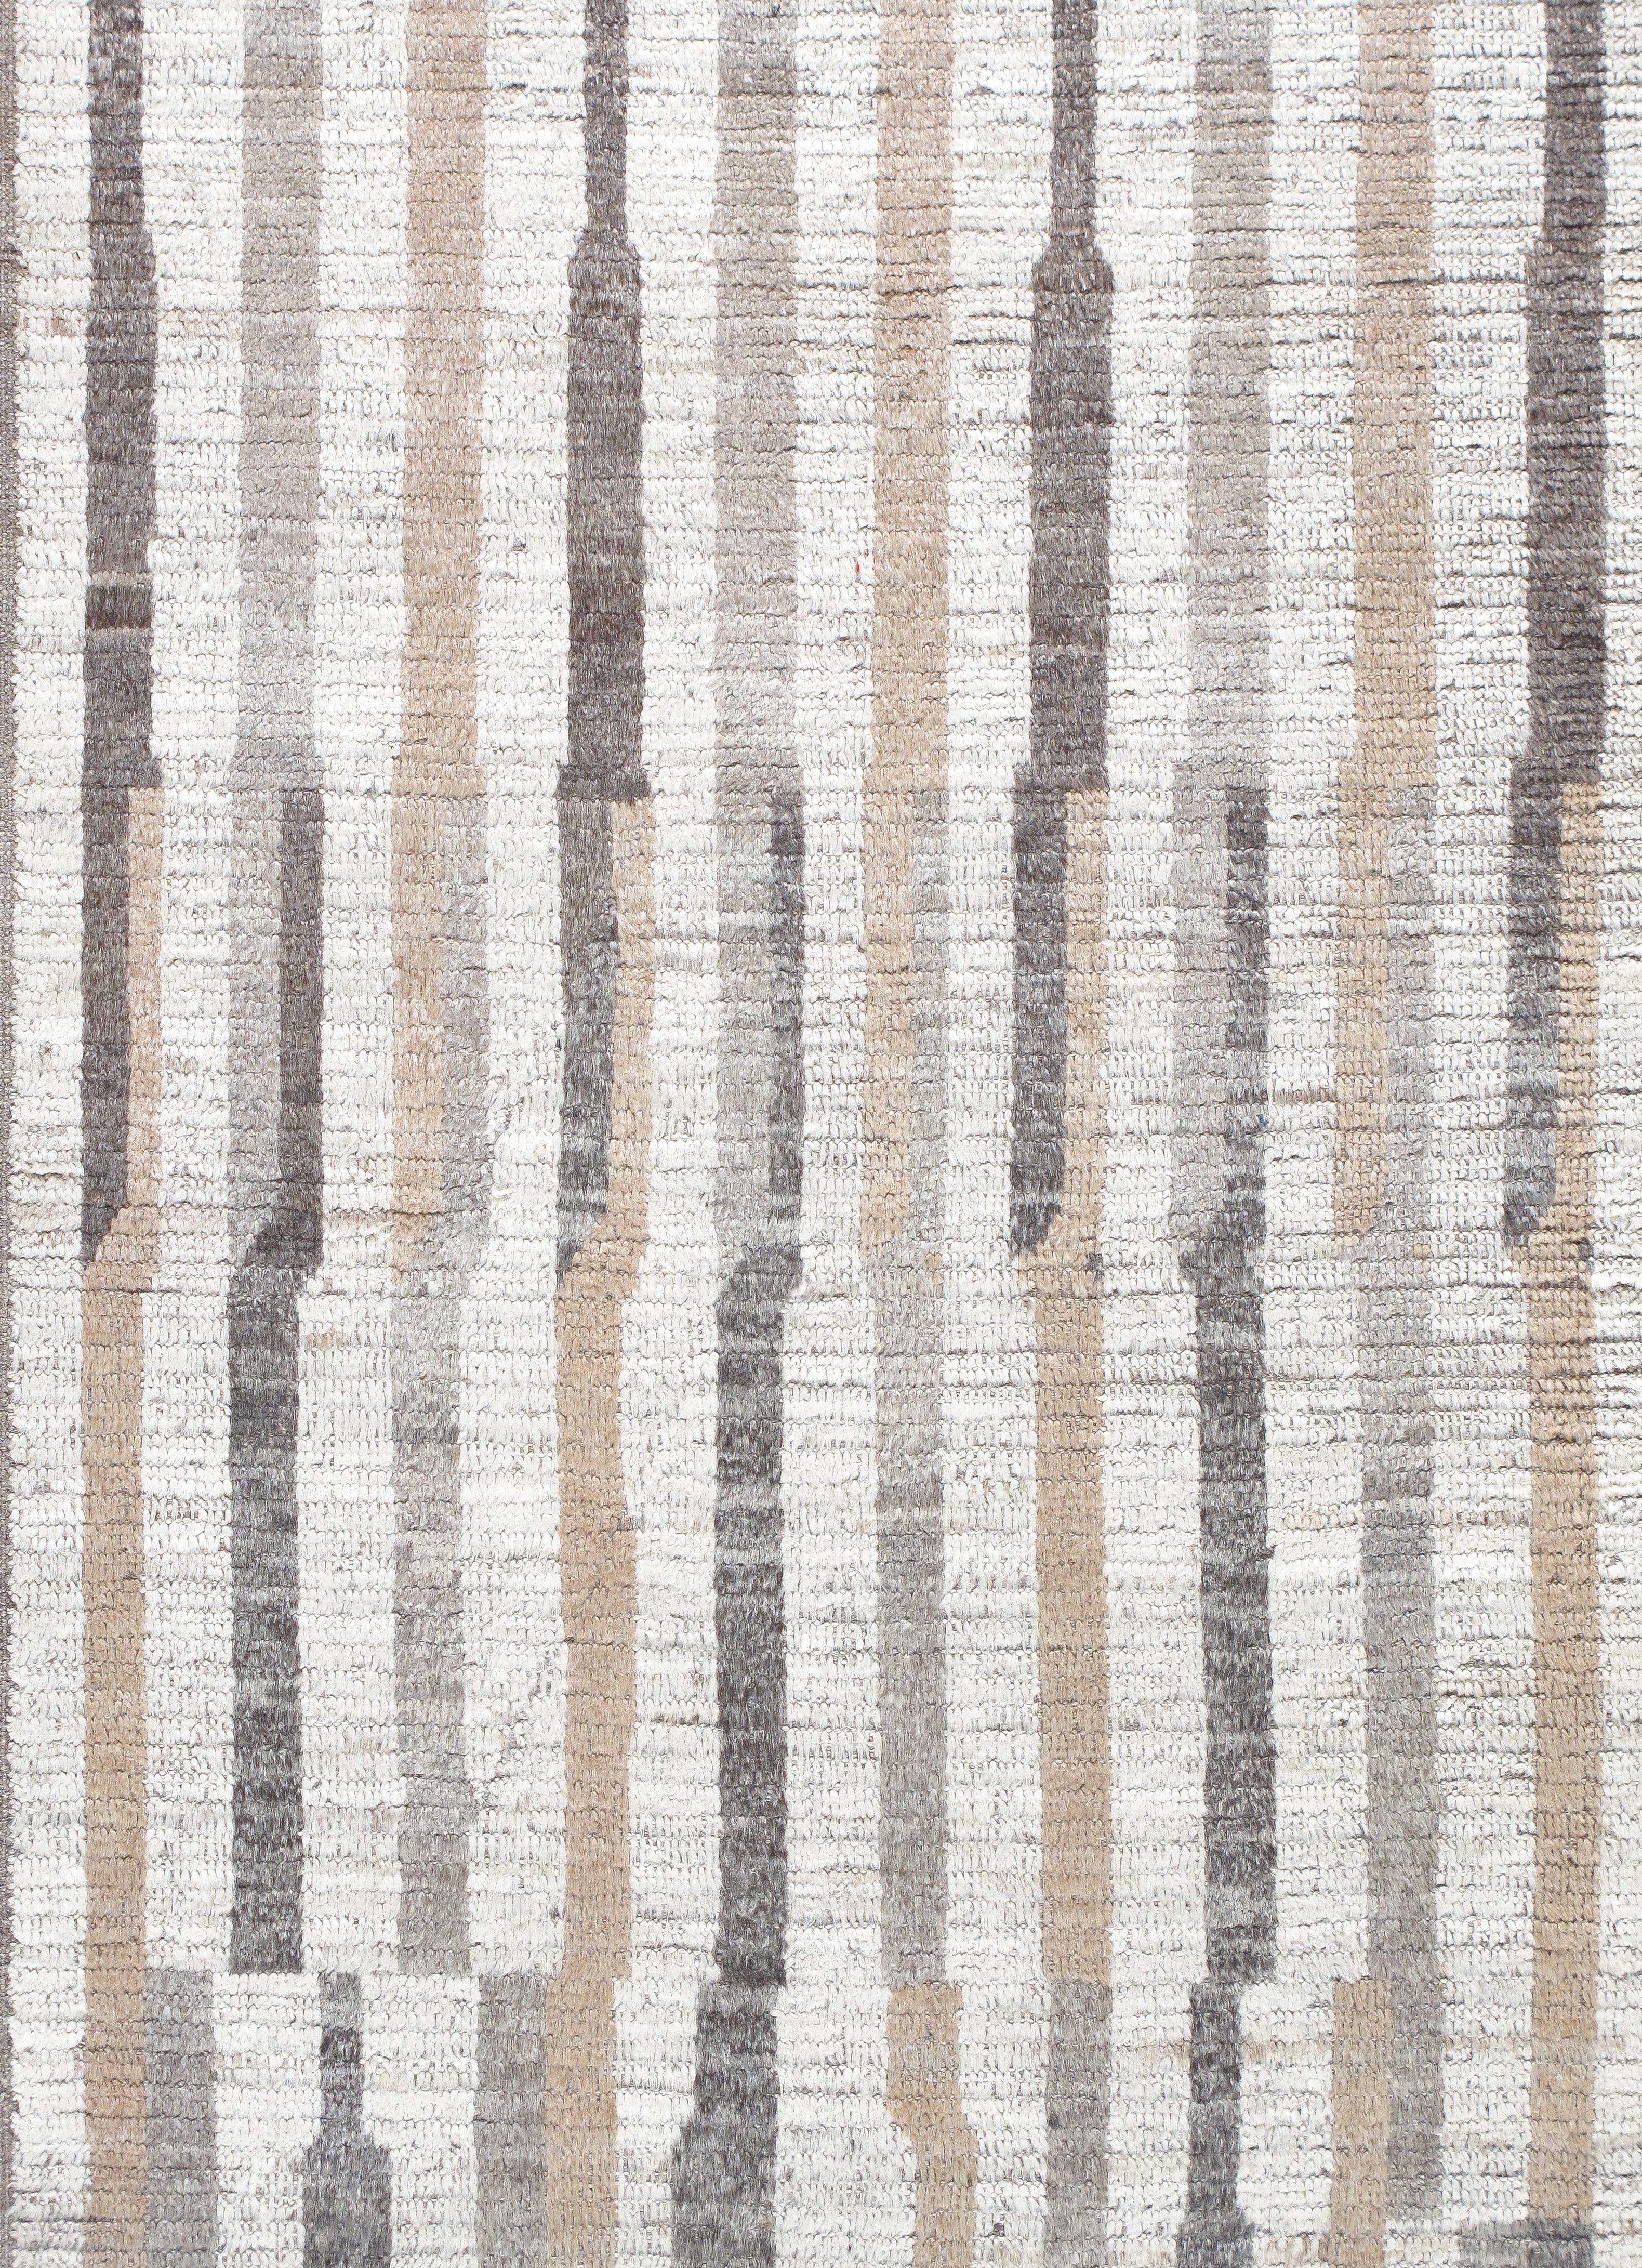 Our Cape Town runner is hand knotted from the finest hand-carded, hand-spun, naturally dyed wool. Its beautiful neutral palette makes this runner a transitional piece for any room.

Custom sizes and colors available.